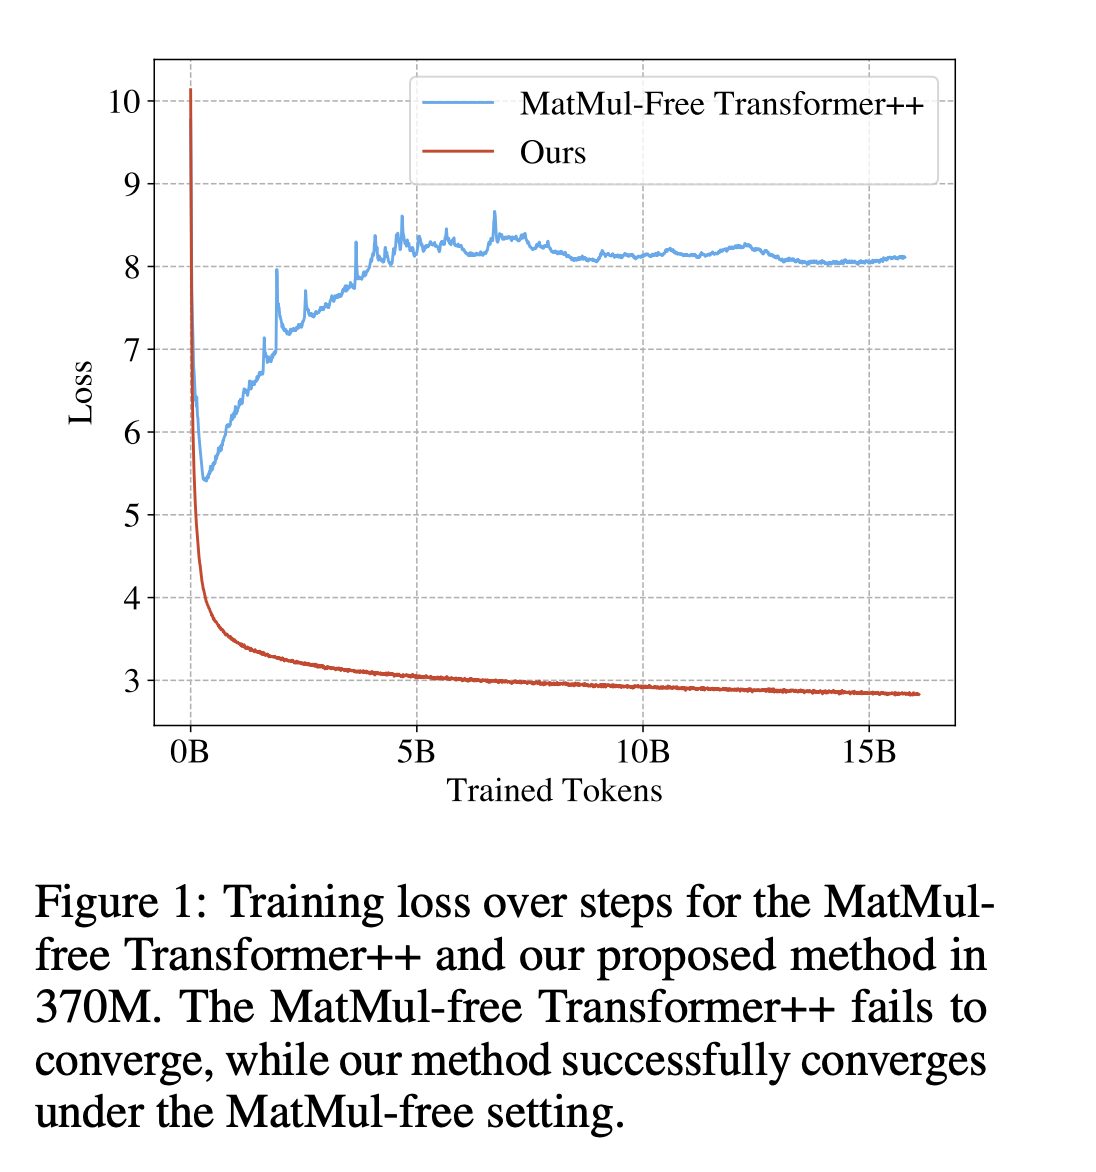  This AI Research Discusses Achieving Efficient Large Language Models (LLMs) by Eliminating Matrix Multiplication for Scalable Performance